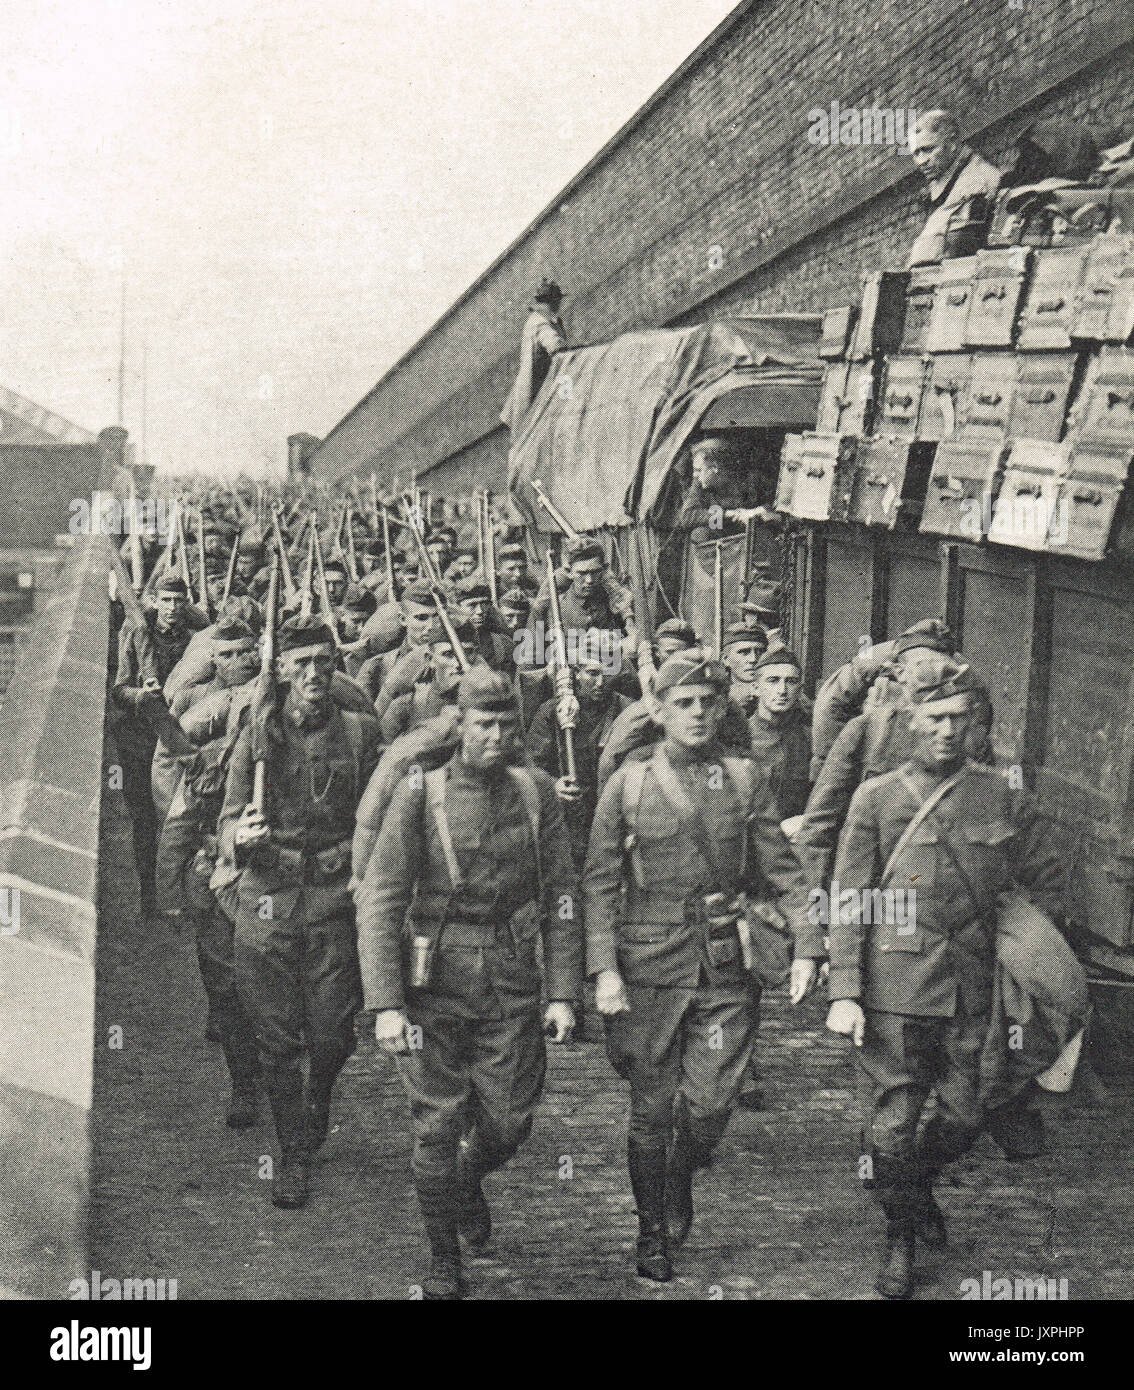 US Troops arriving in France, 1917, WW1 Stock Photo